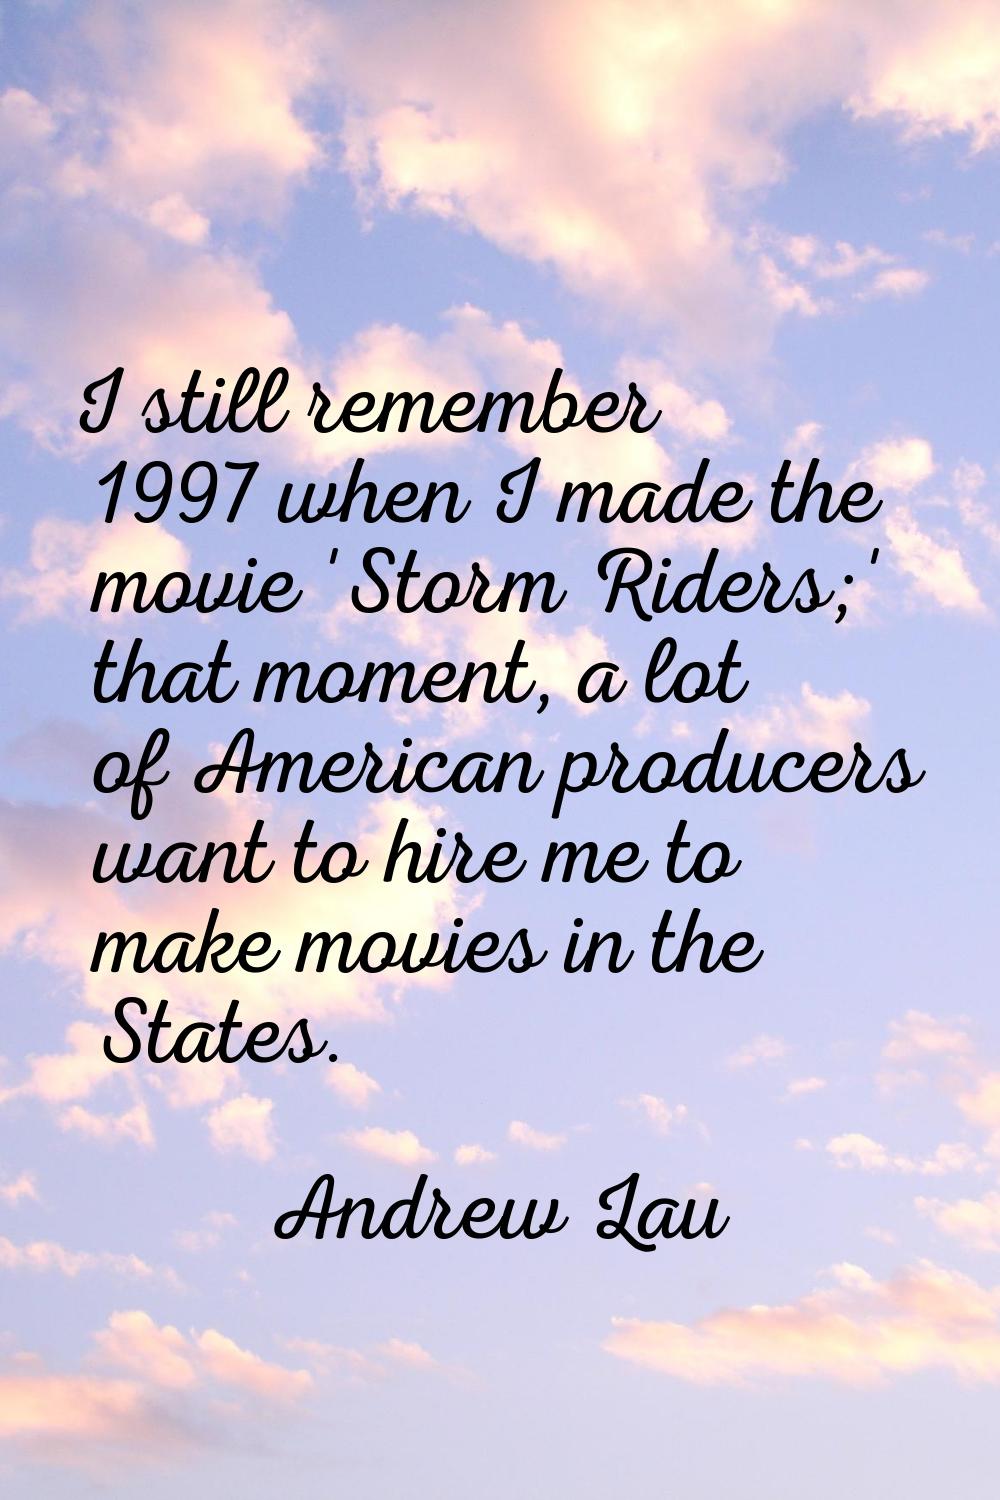 I still remember 1997 when I made the movie 'Storm Riders;' that moment, a lot of American producer